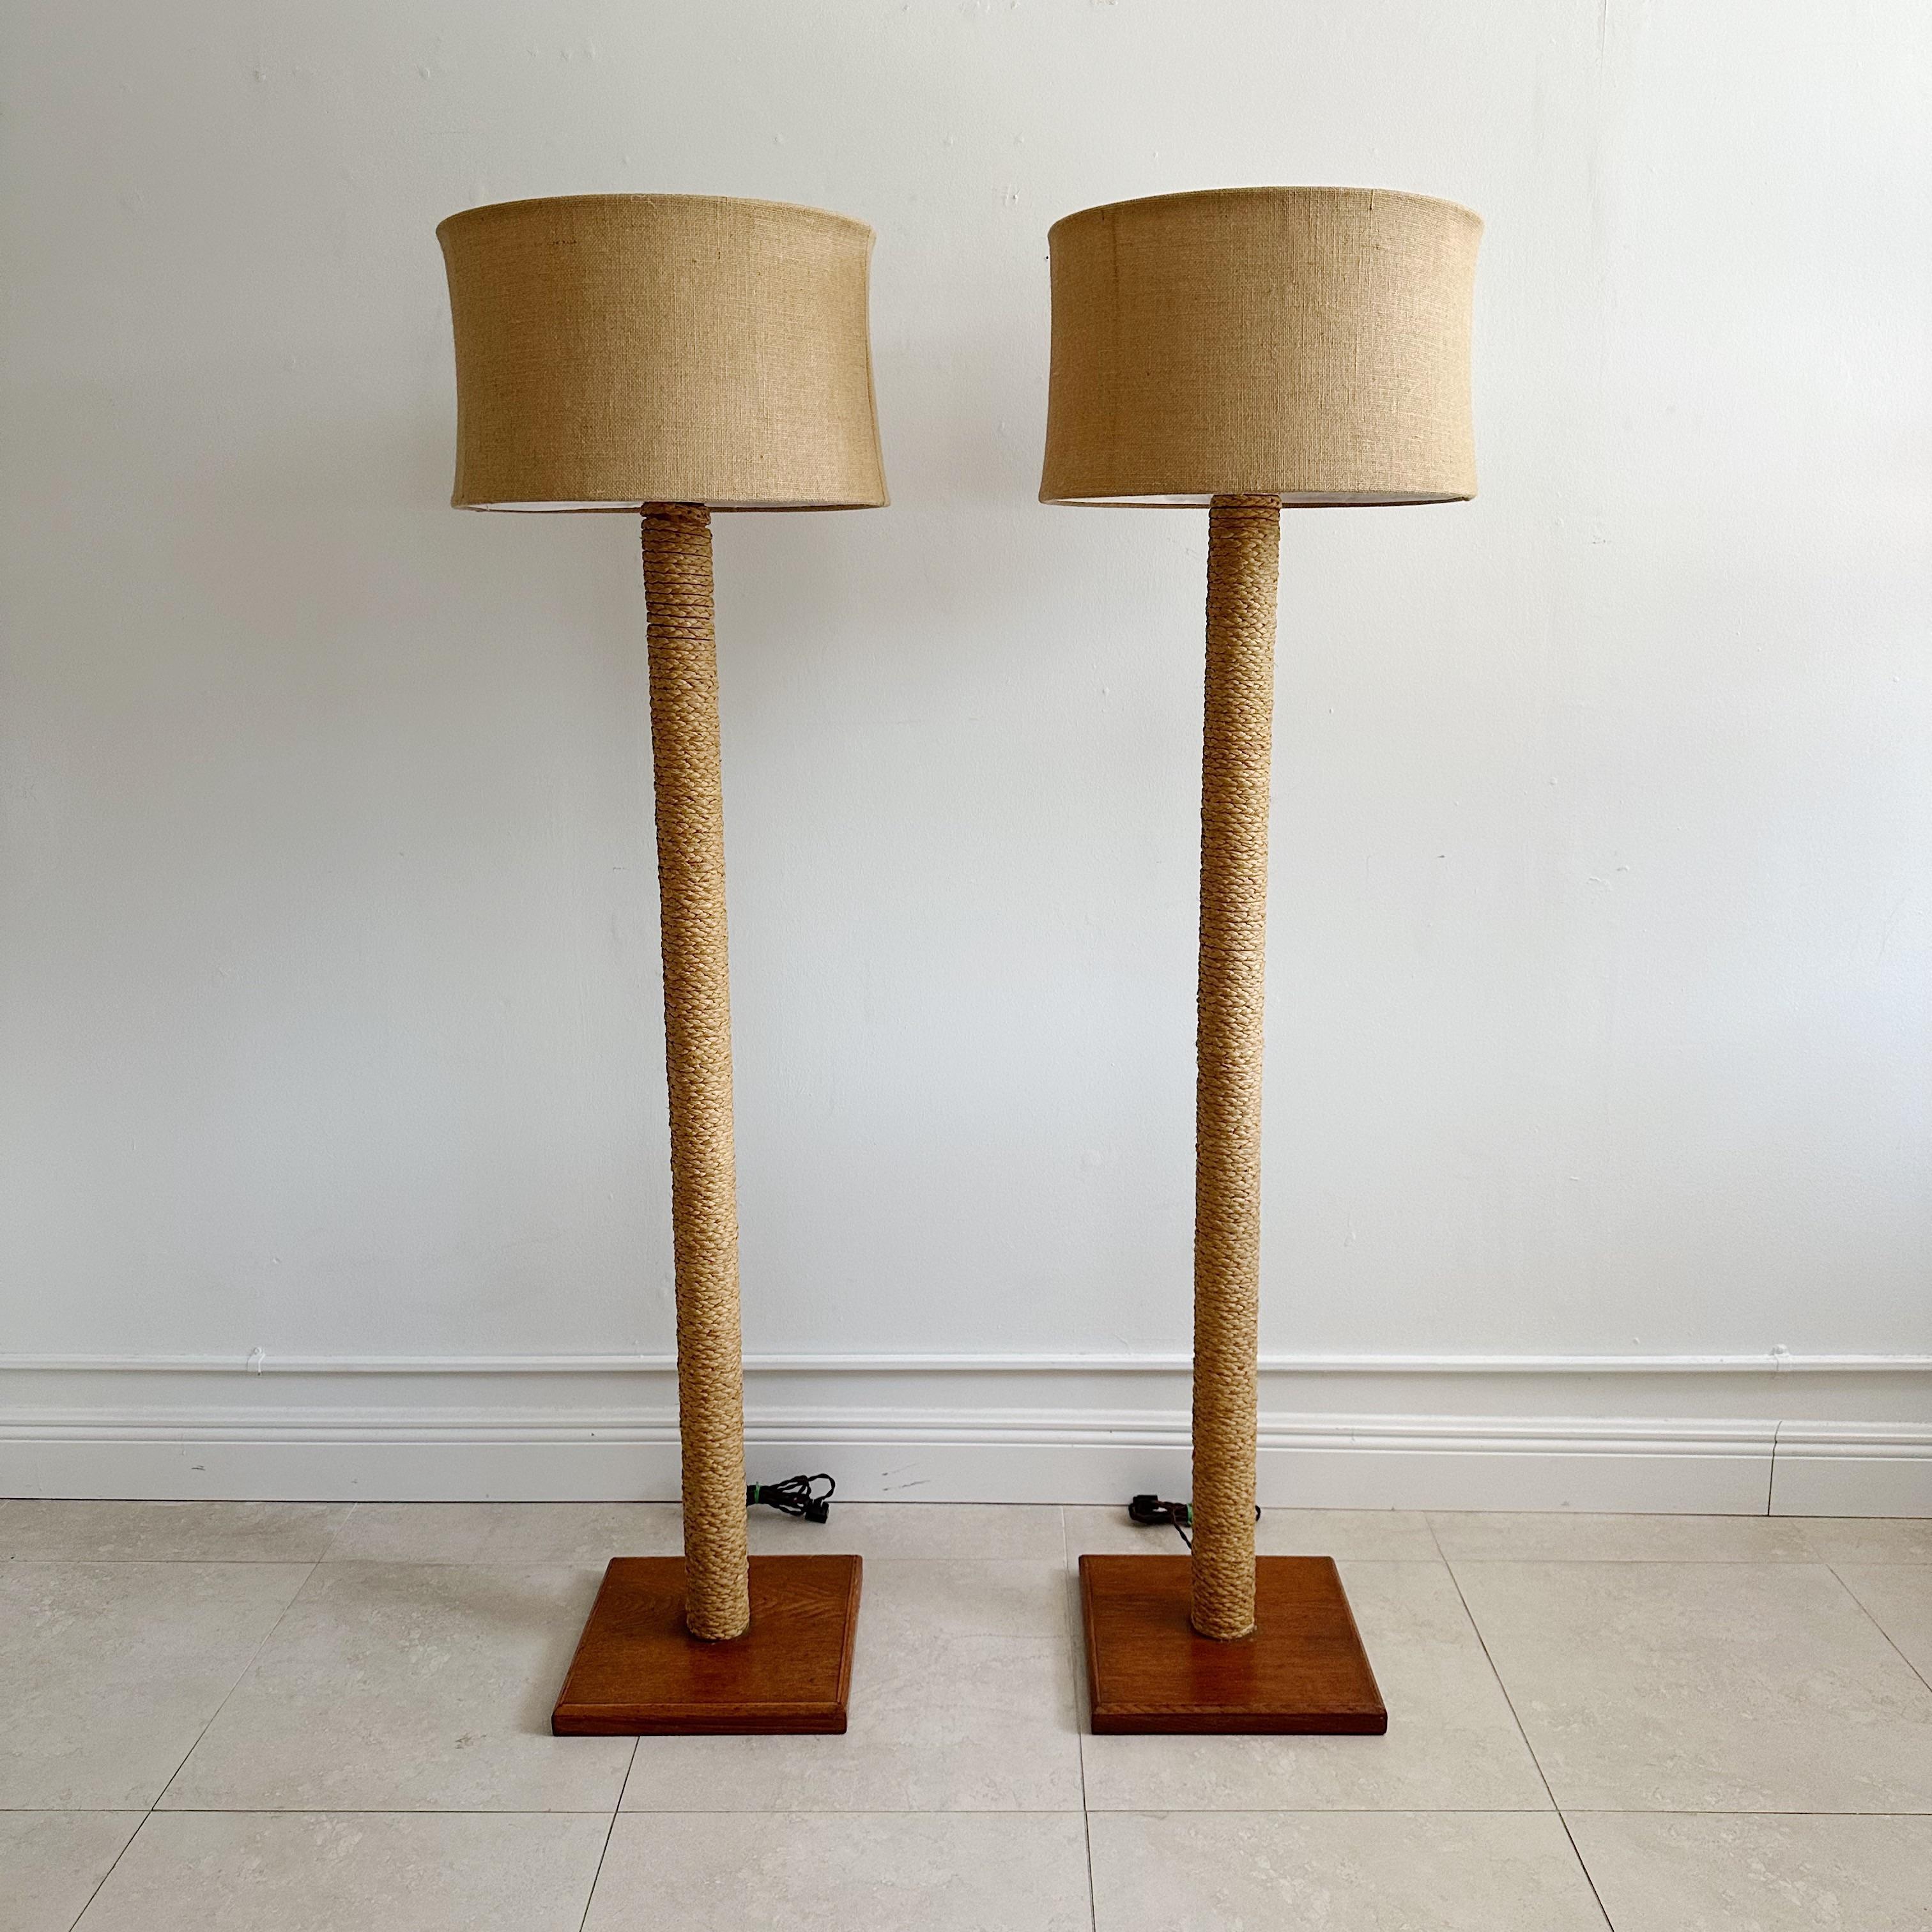 Pair of Adrien Audoux and Frida Minet Modern Rope Floor Lamps, France, 1950s For Sale 4